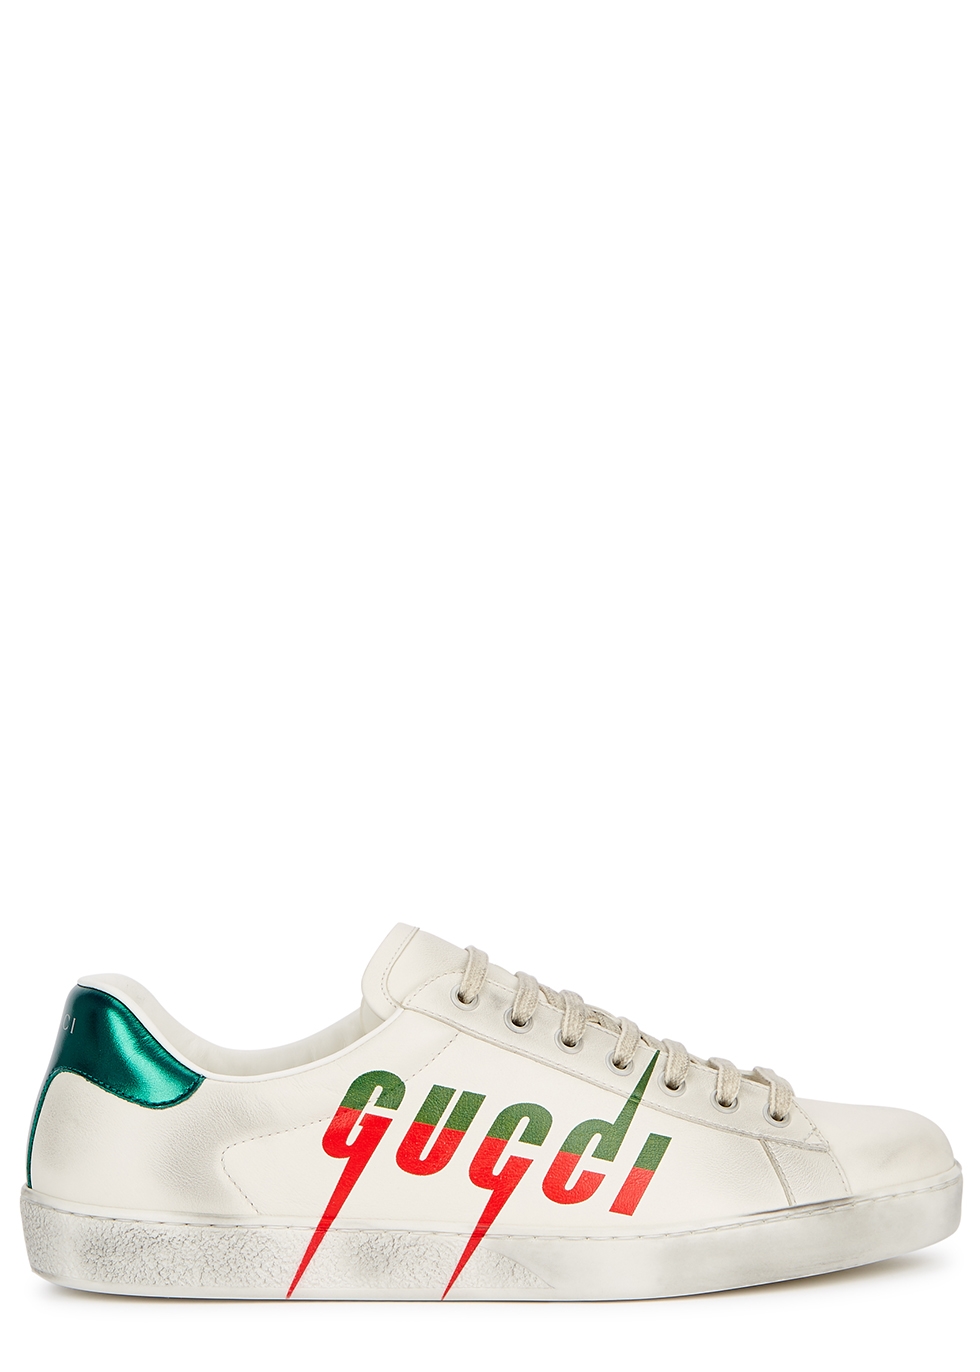 Gucci Ace white logo leather sneakers 